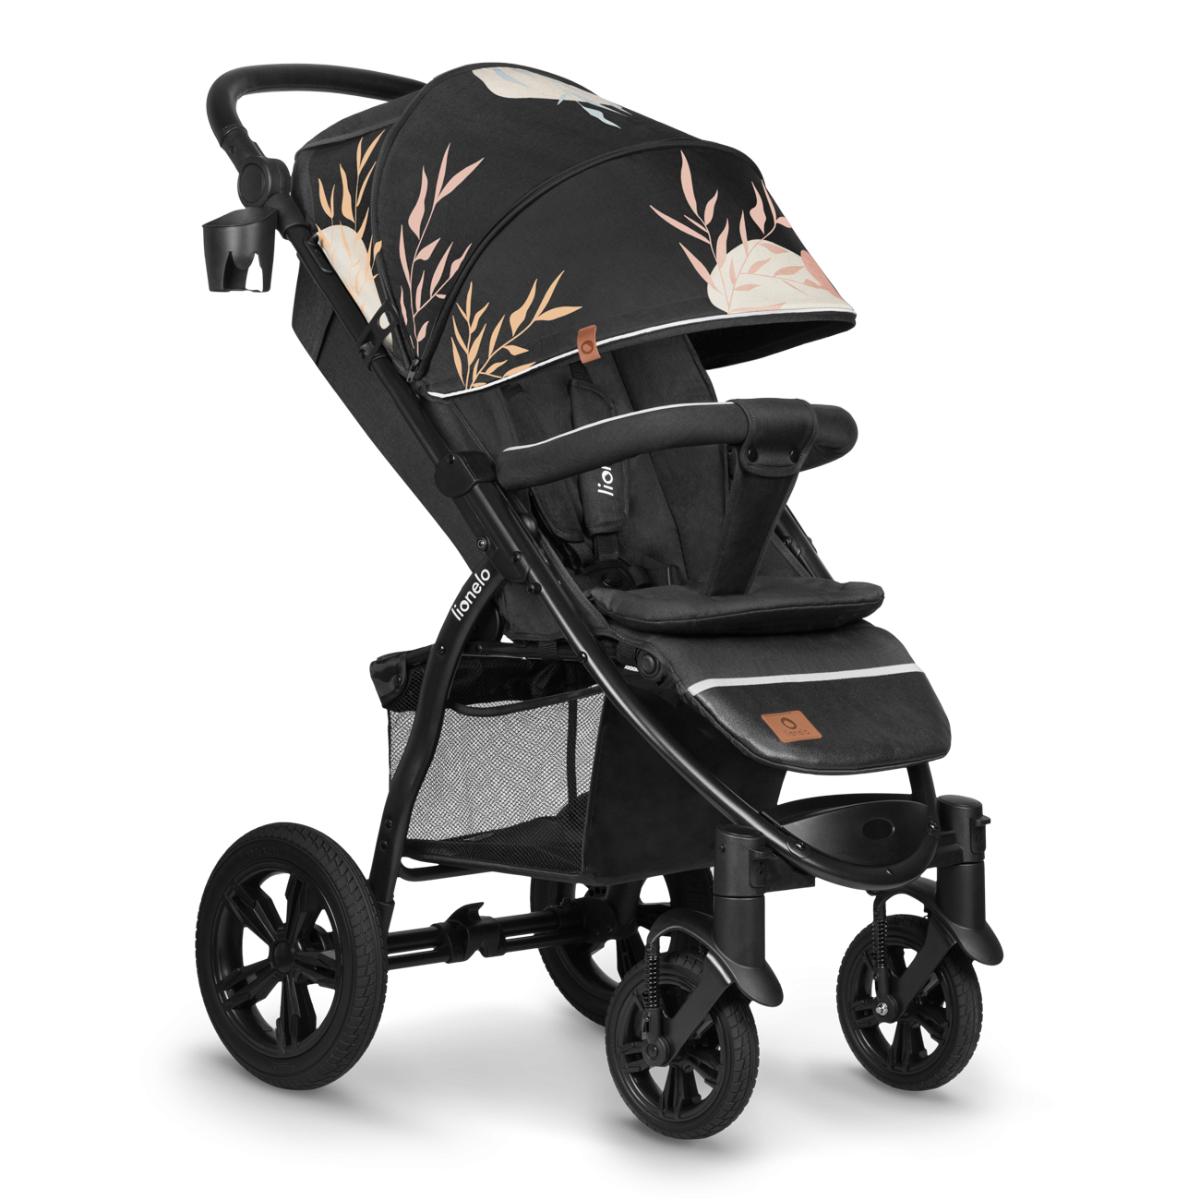 Annet Tour Lionelo Lovin Baby Compact Stroller Buggy Pushchair Footmuff